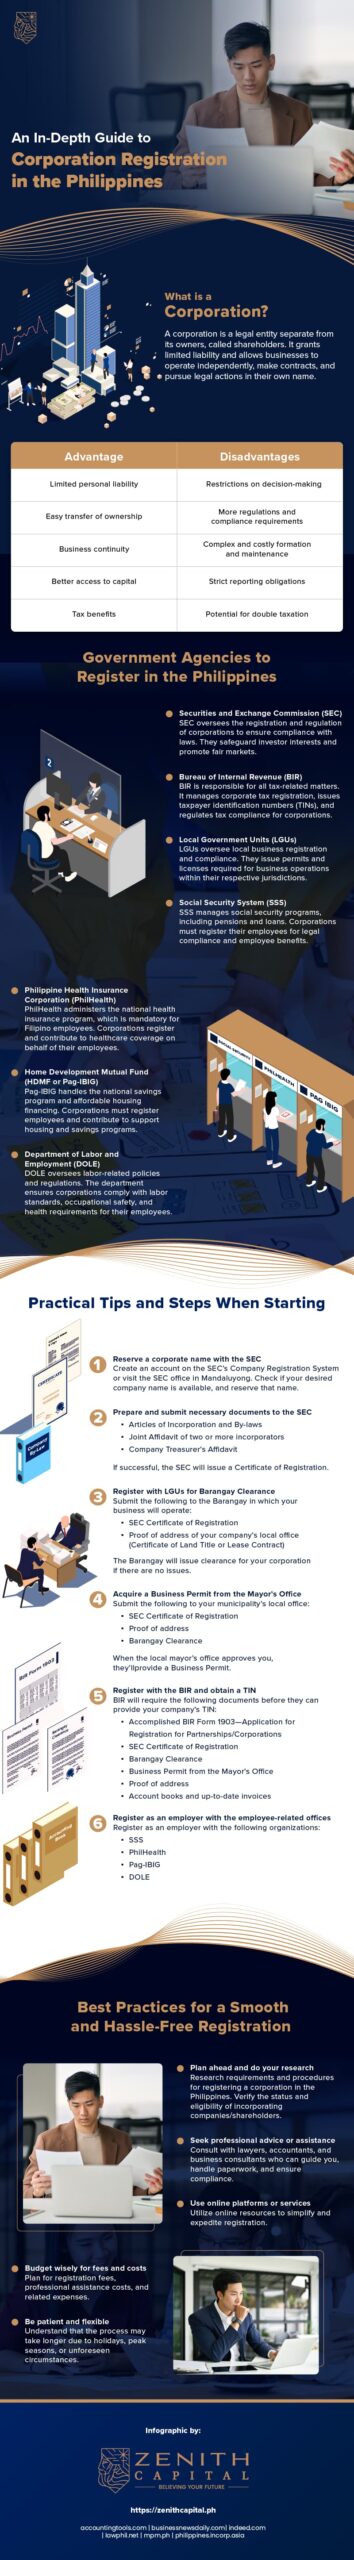 Guide to Corporation Registration in the Philippines - Infographic - Zenith Capital